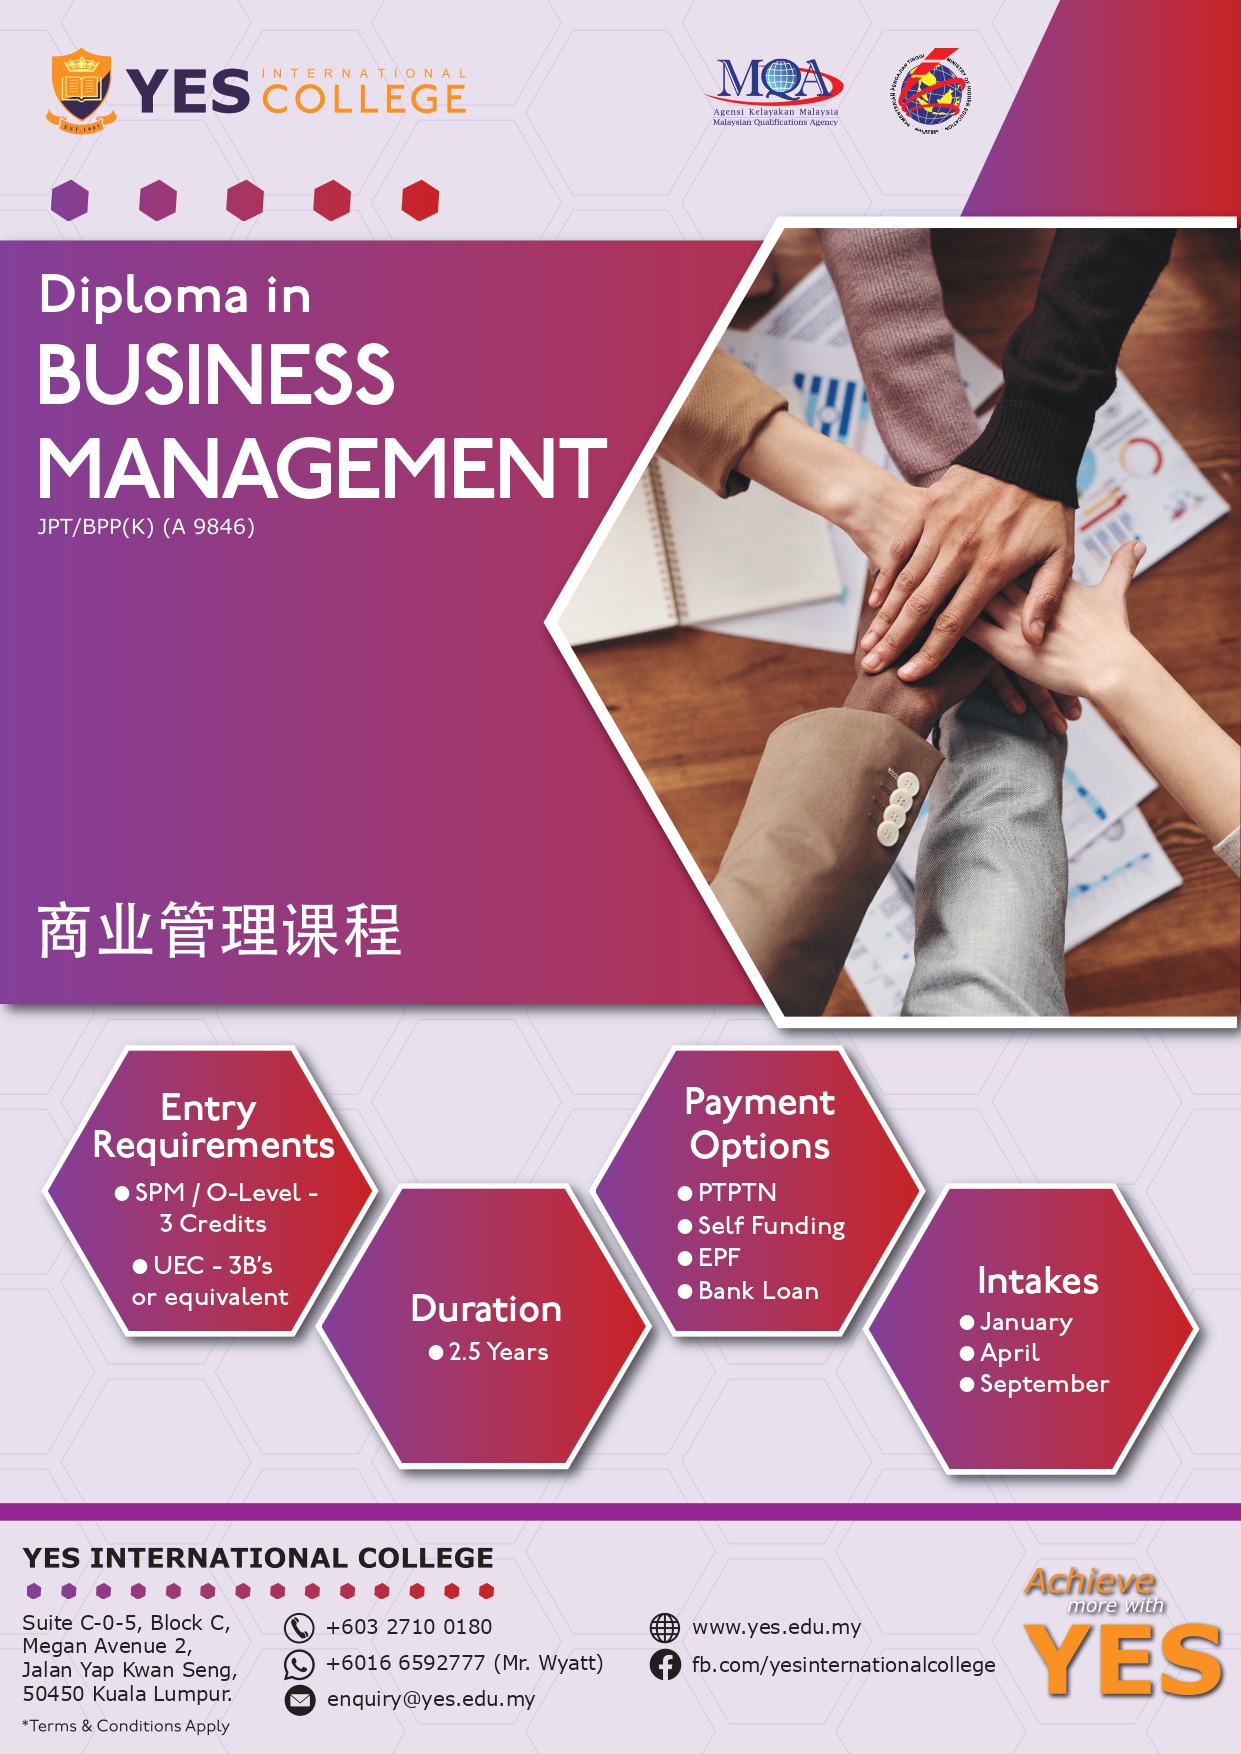 DIPLOMA IN BUSINESS MANAGEMENT